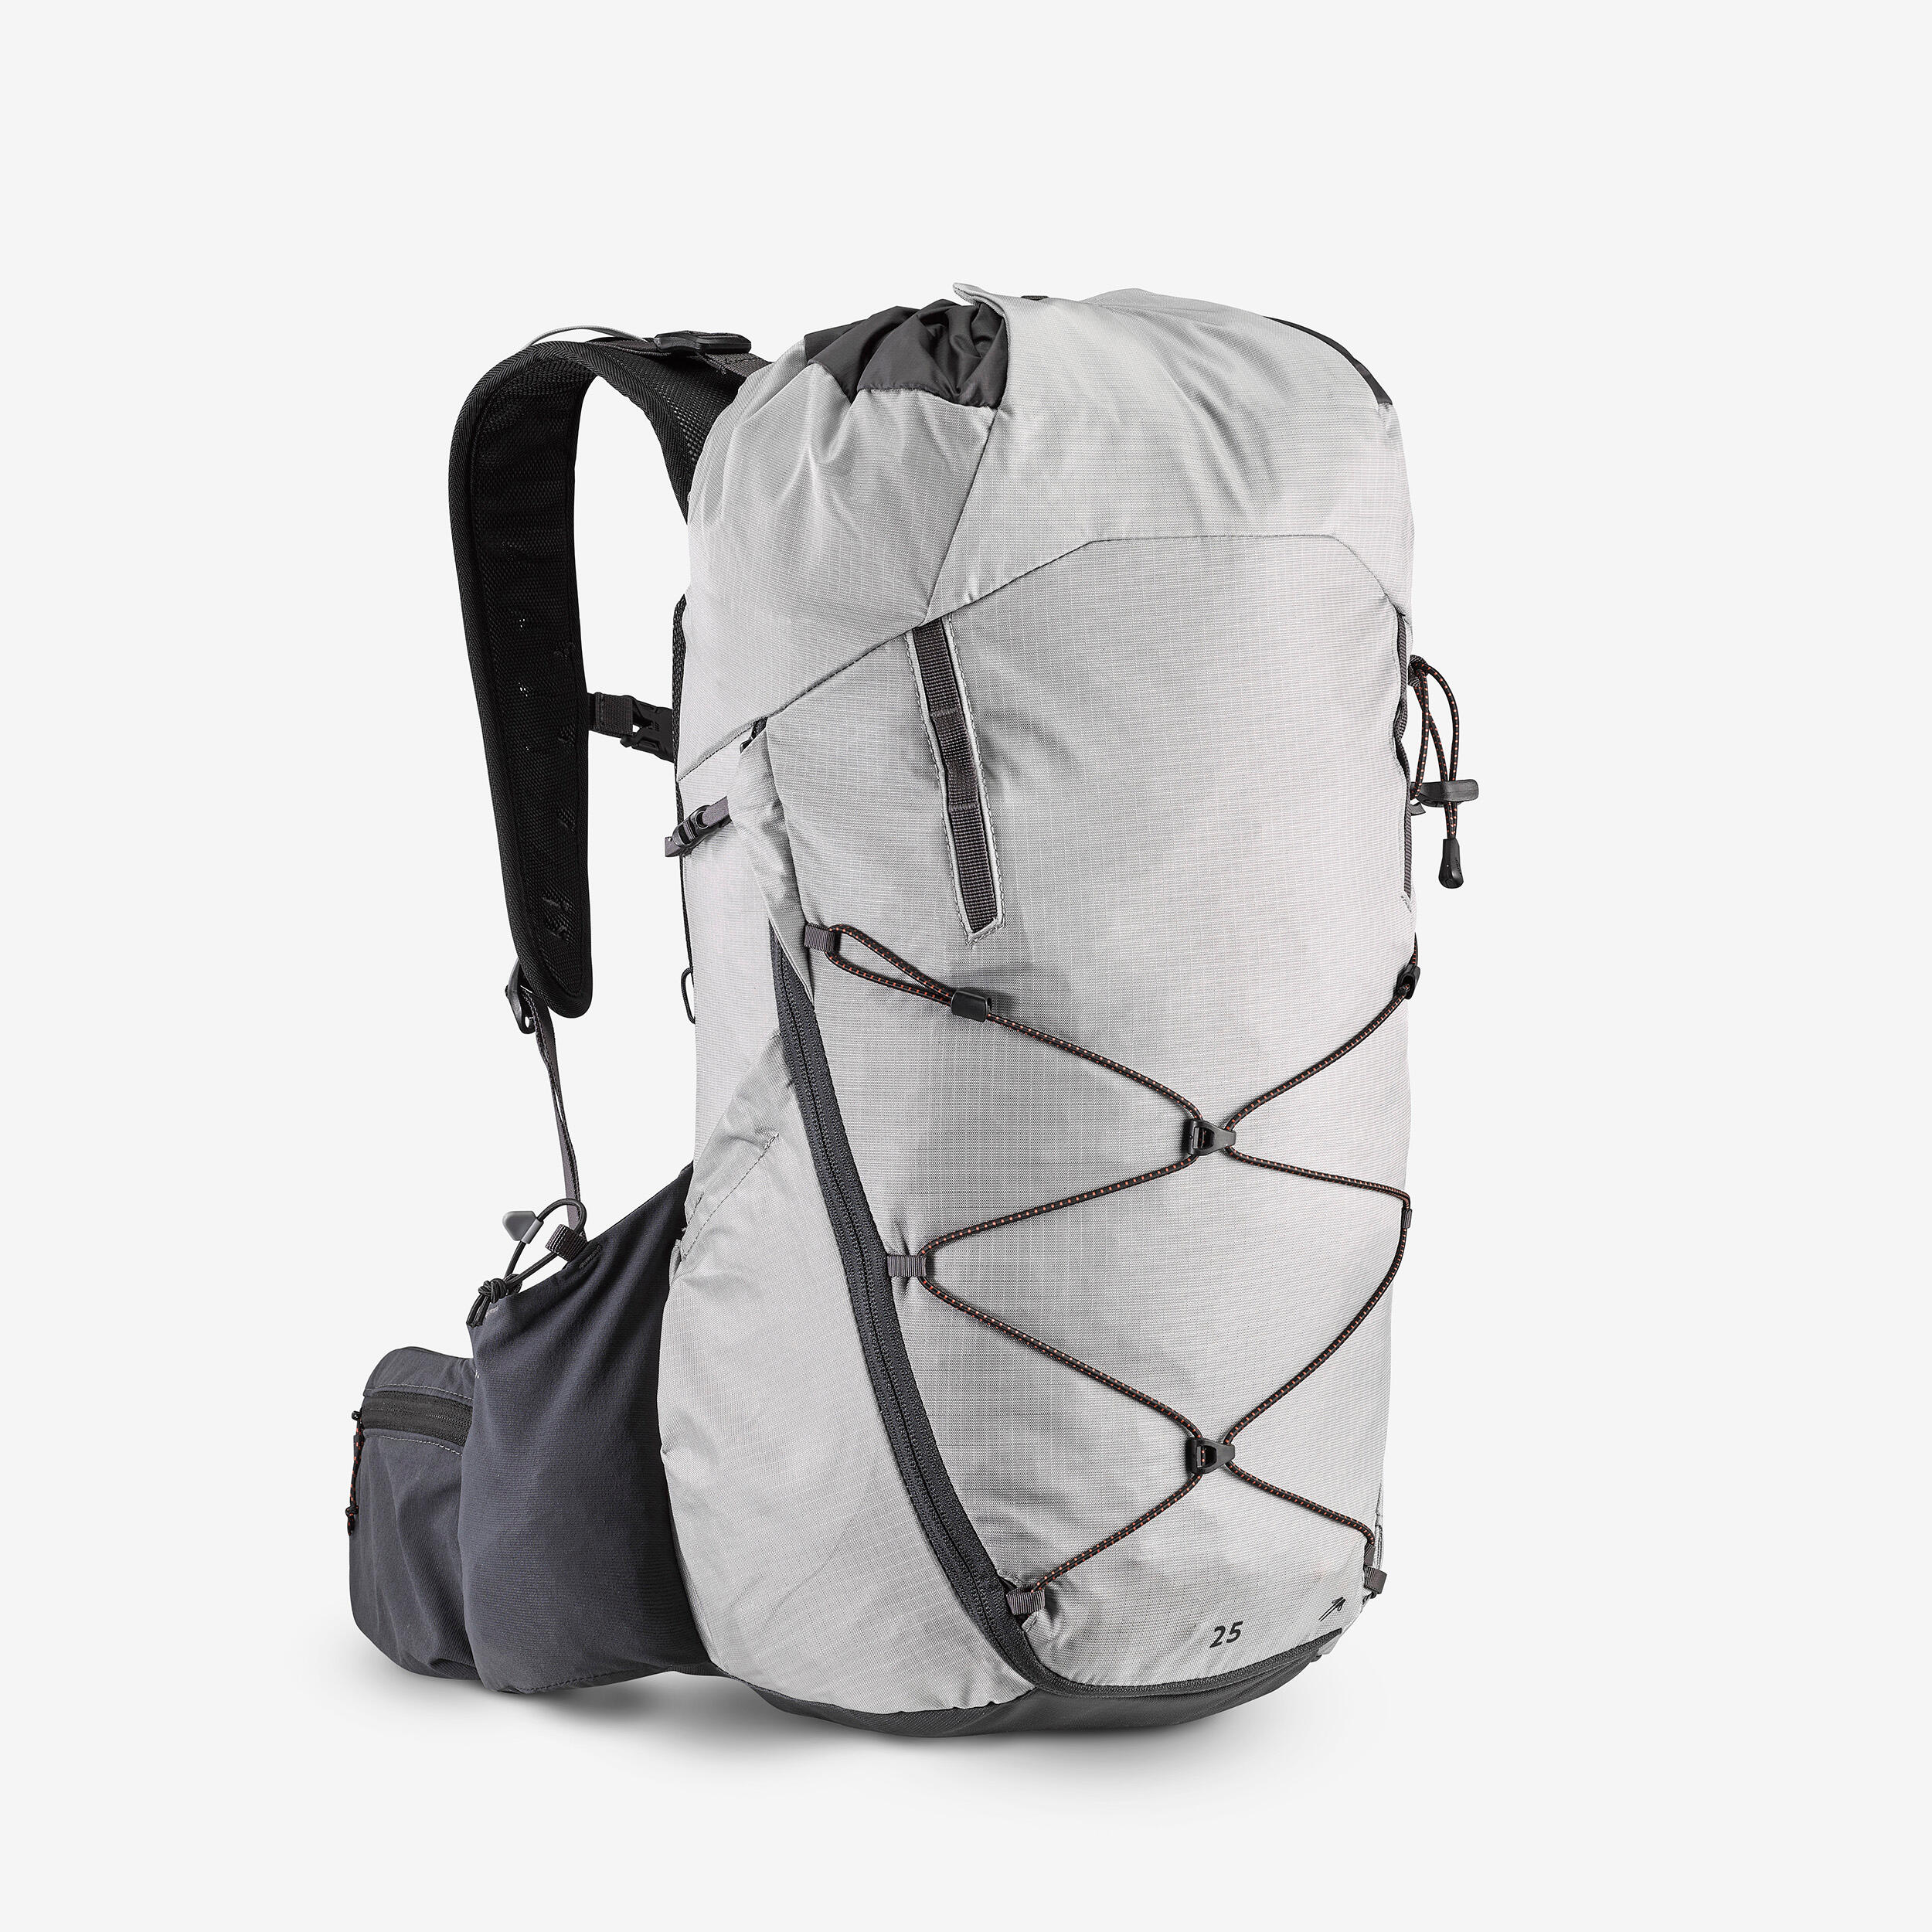 Mountain hiking backpack 25L - MH900 5/18